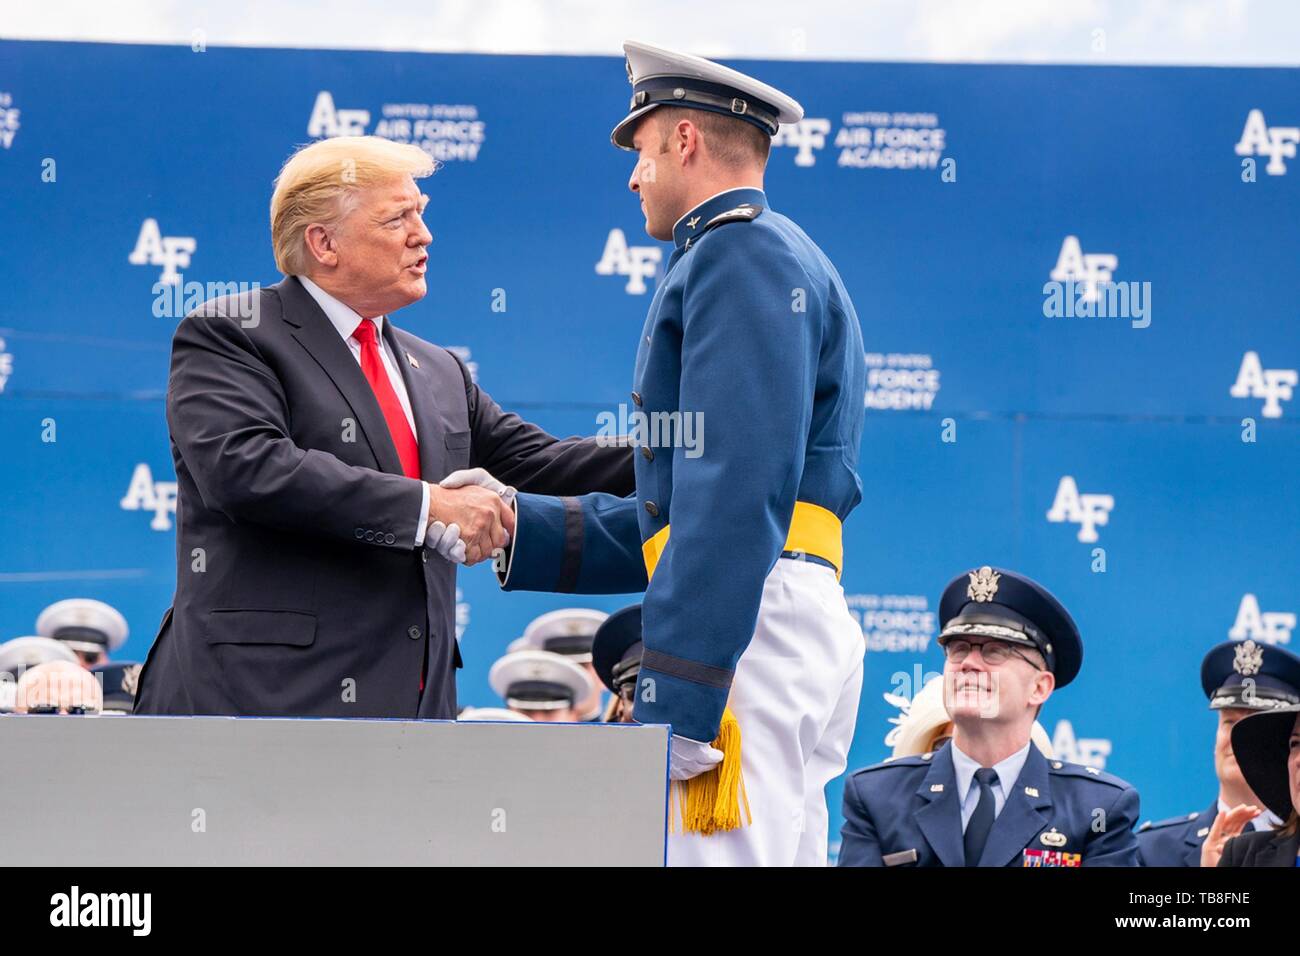 U.S President Donald Trump congratulates cadet Nic Ready on stage at the U.S. Air Force Academy Graduation Ceremony at the USAF Academy Falcon Stadium May 30, 2019 in Colorado Springs, Colorado. Cadet Ready is the college baseball homerun derby winner. Credit: Planetpix/Alamy Live News Stock Photo